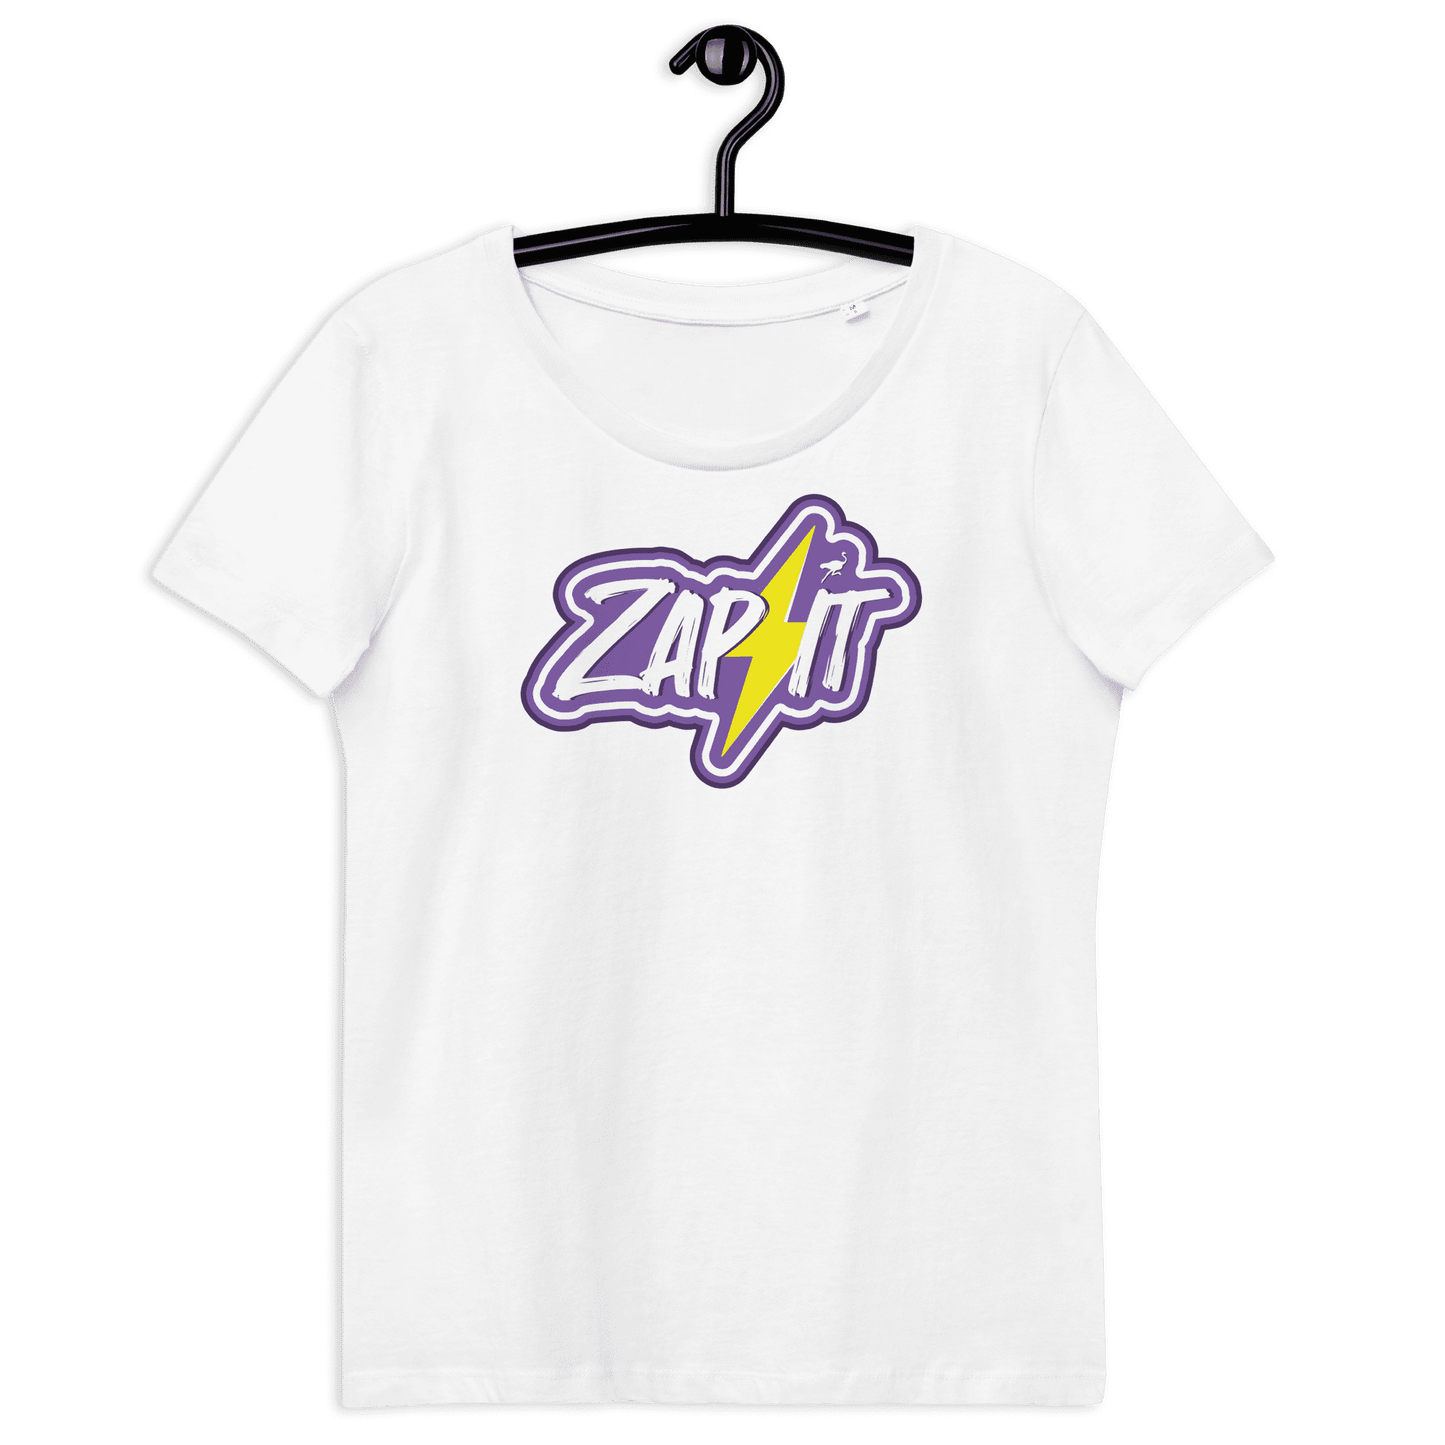 Zap it Women's fitted eco tee